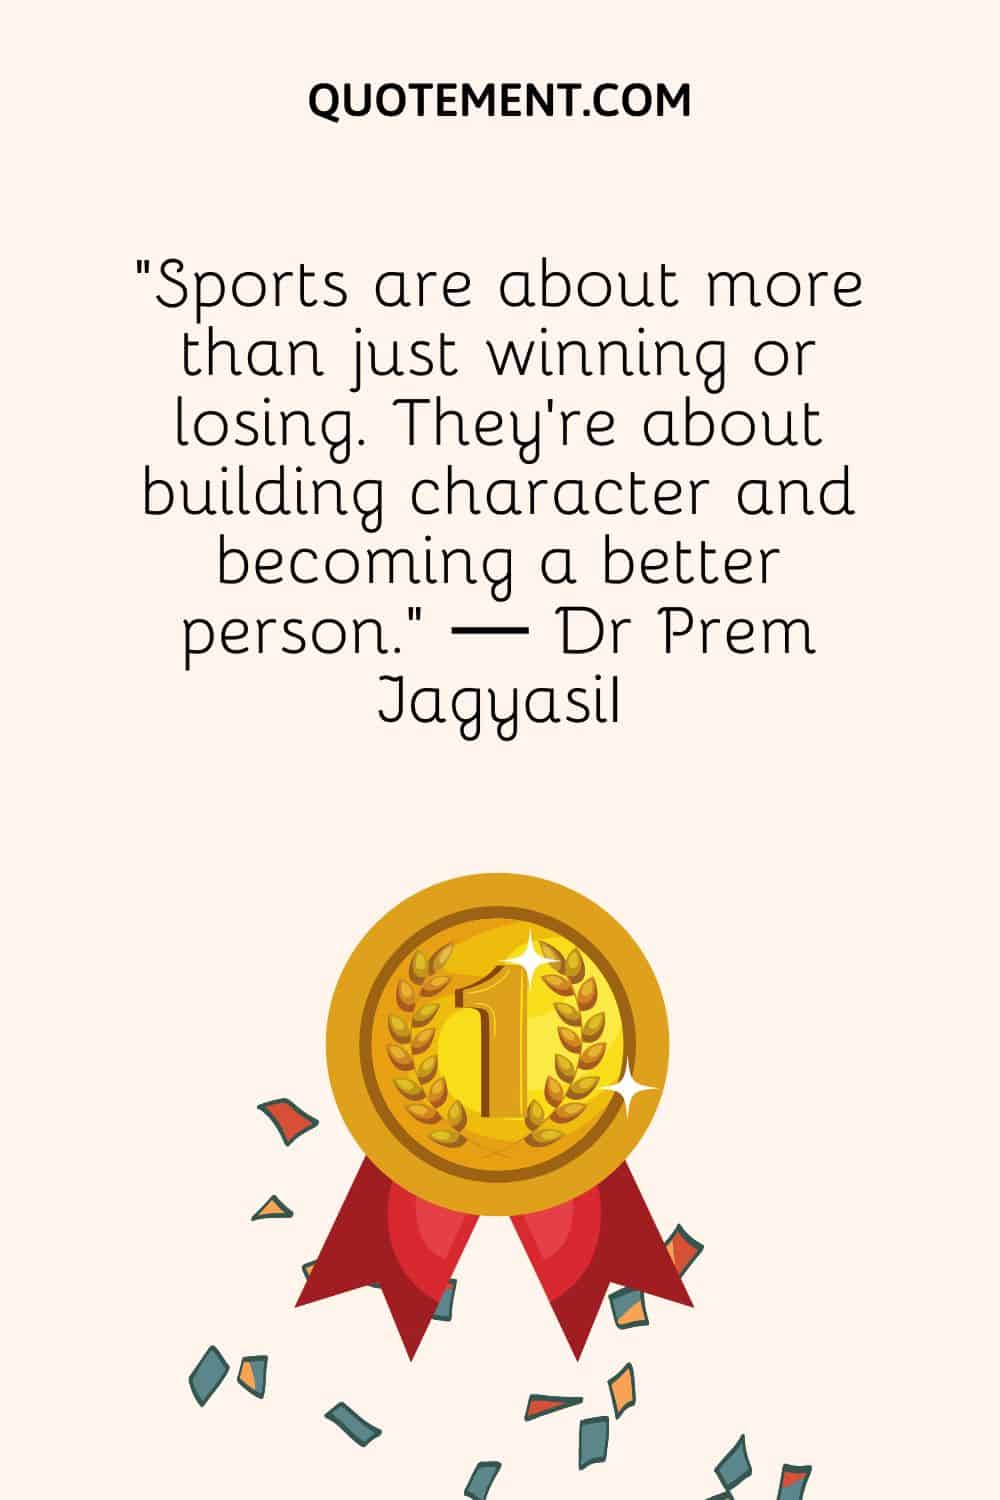 “Sports are about more than just winning or losing. They're about building character and becoming a better person.” ― Dr Prem JagyasiI